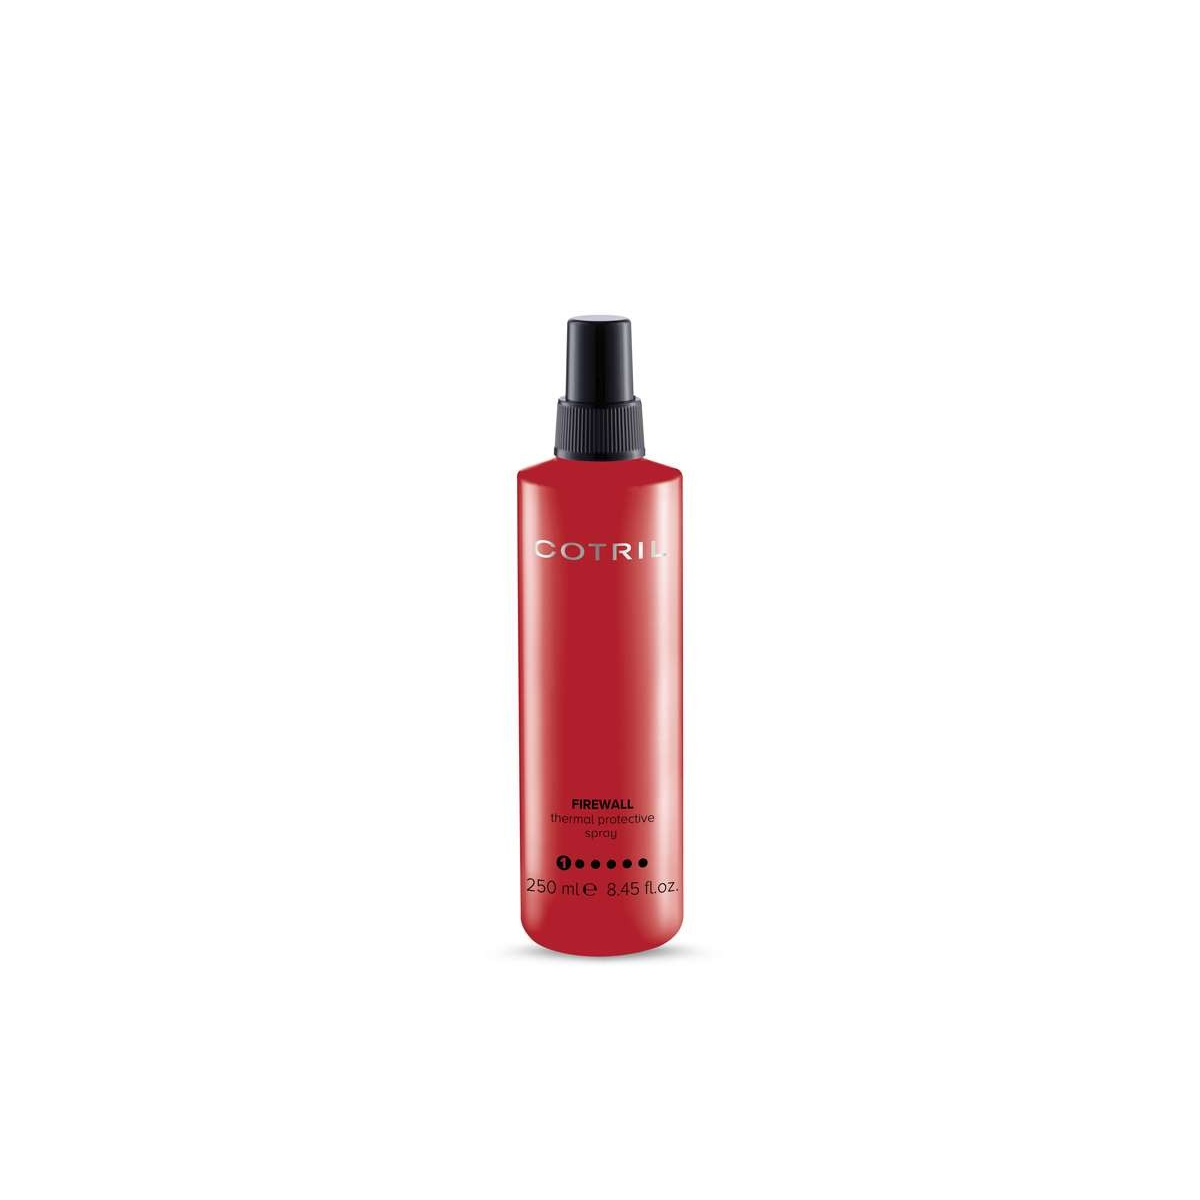 COTRIL - FIREWALL (250ml) Spray termoprotettore